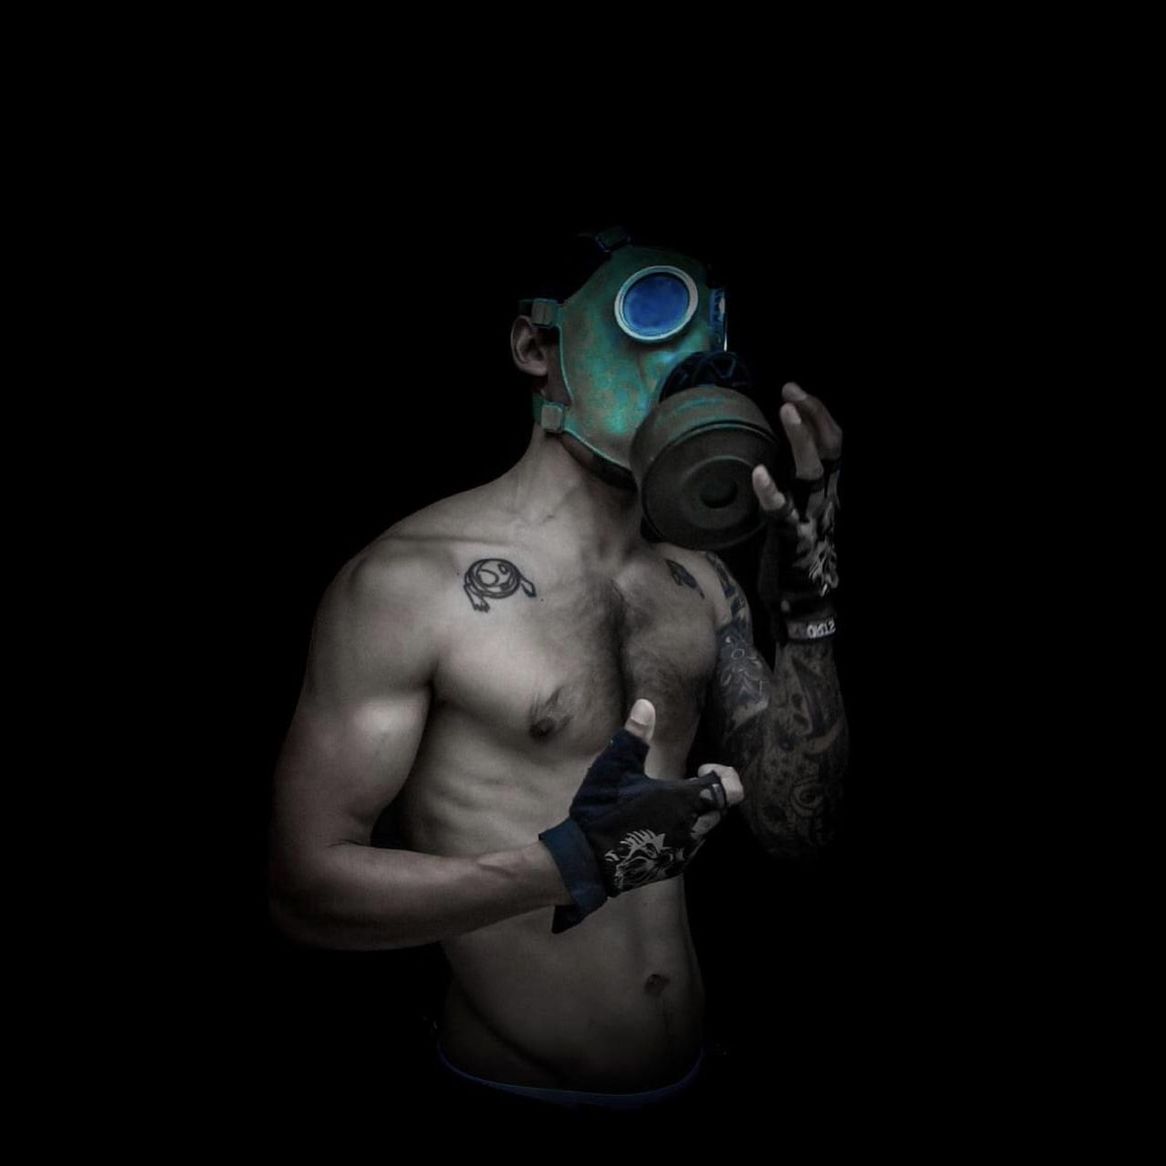 black background, studio shot, one person, indoors, adult, sports, men, cut out, strength, copy space, muscular build, portrait, gas mask, athlete